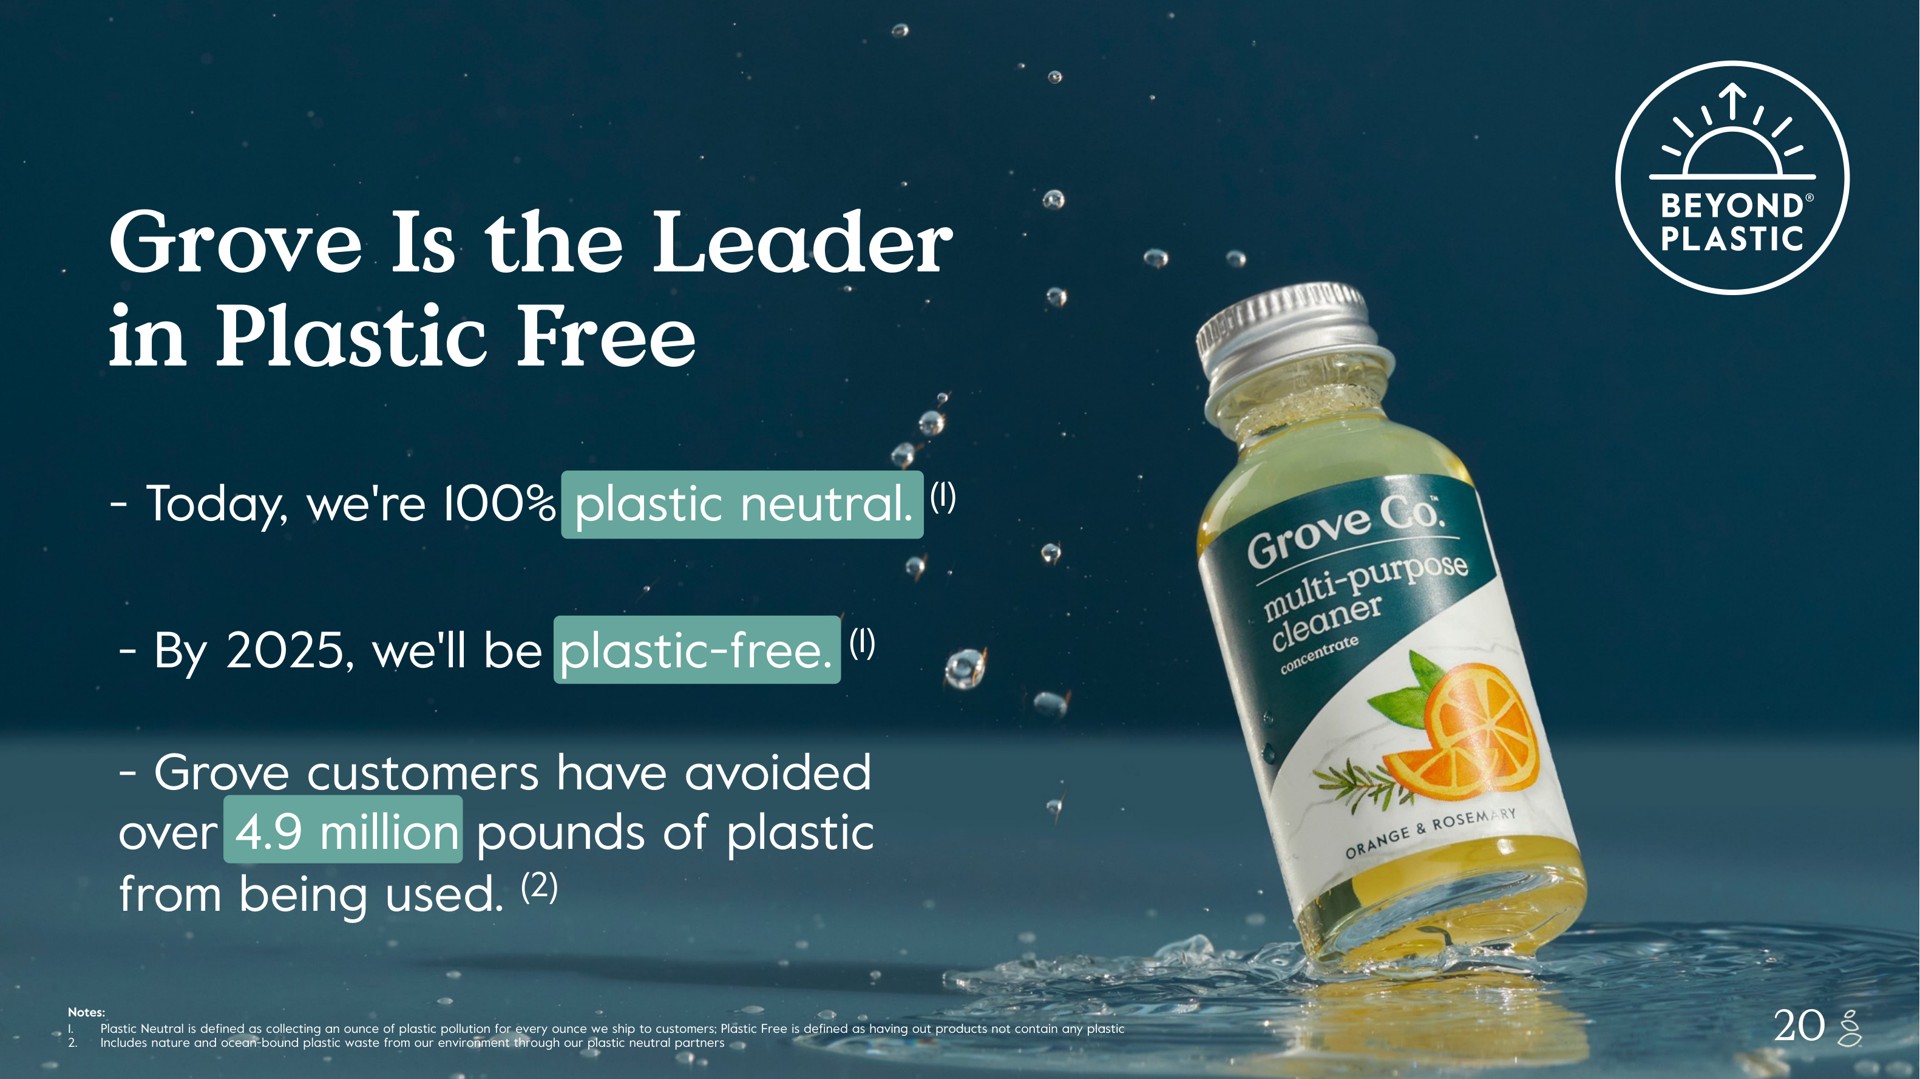 grove is the leader in plastic free today we plastic neutral by we be plastic free grove customers have avoided over million pounds of plastic from being used lets fess a rise as collecting an ounce includes nature and bound waste our pees for every ounce ship to defined as having out products not a partners aes pap | Grove